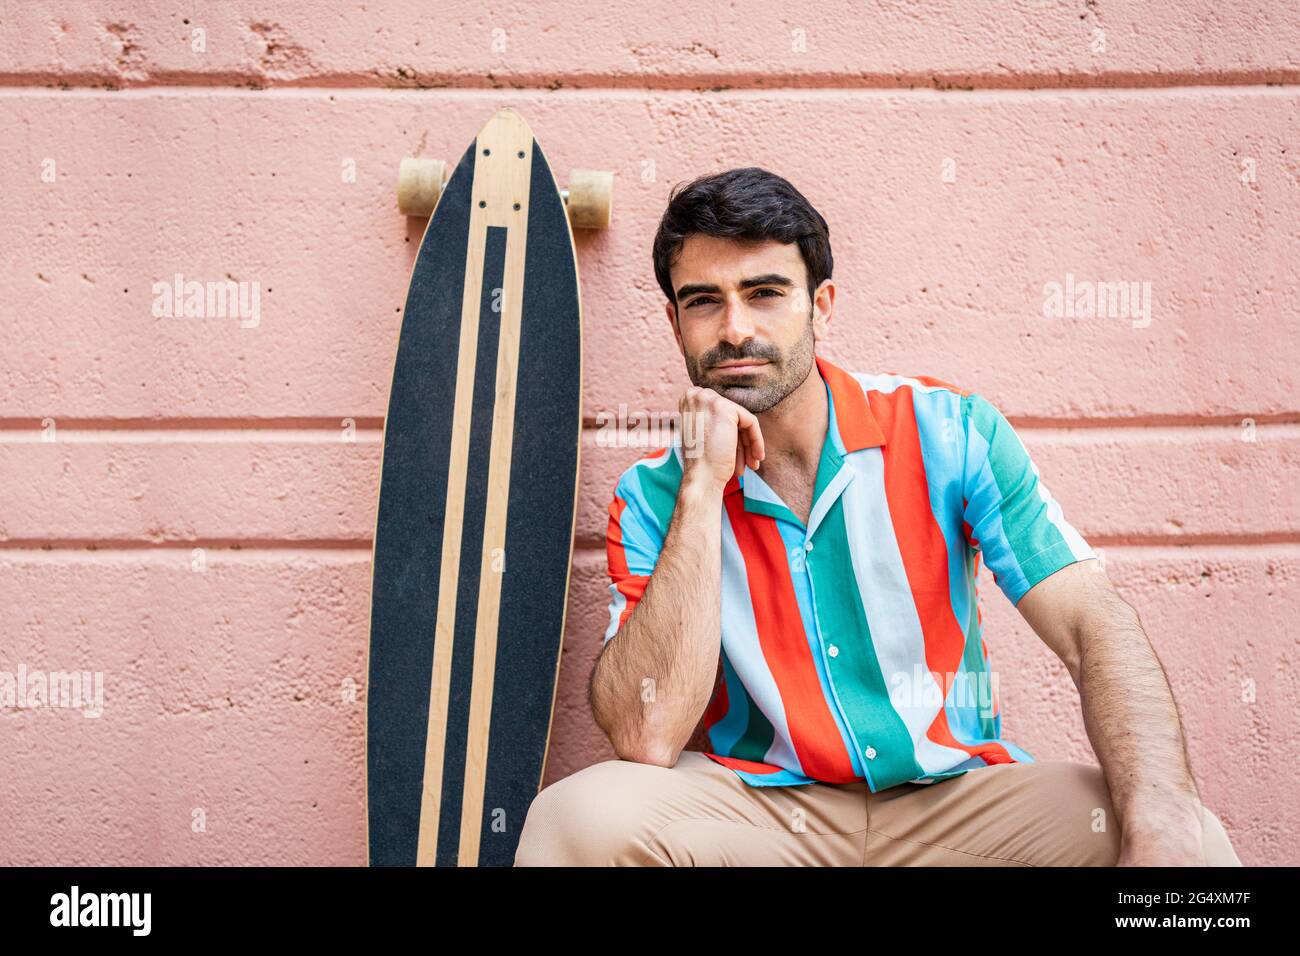 Handsome man with hand on chin sitting by longboard Stock Photo